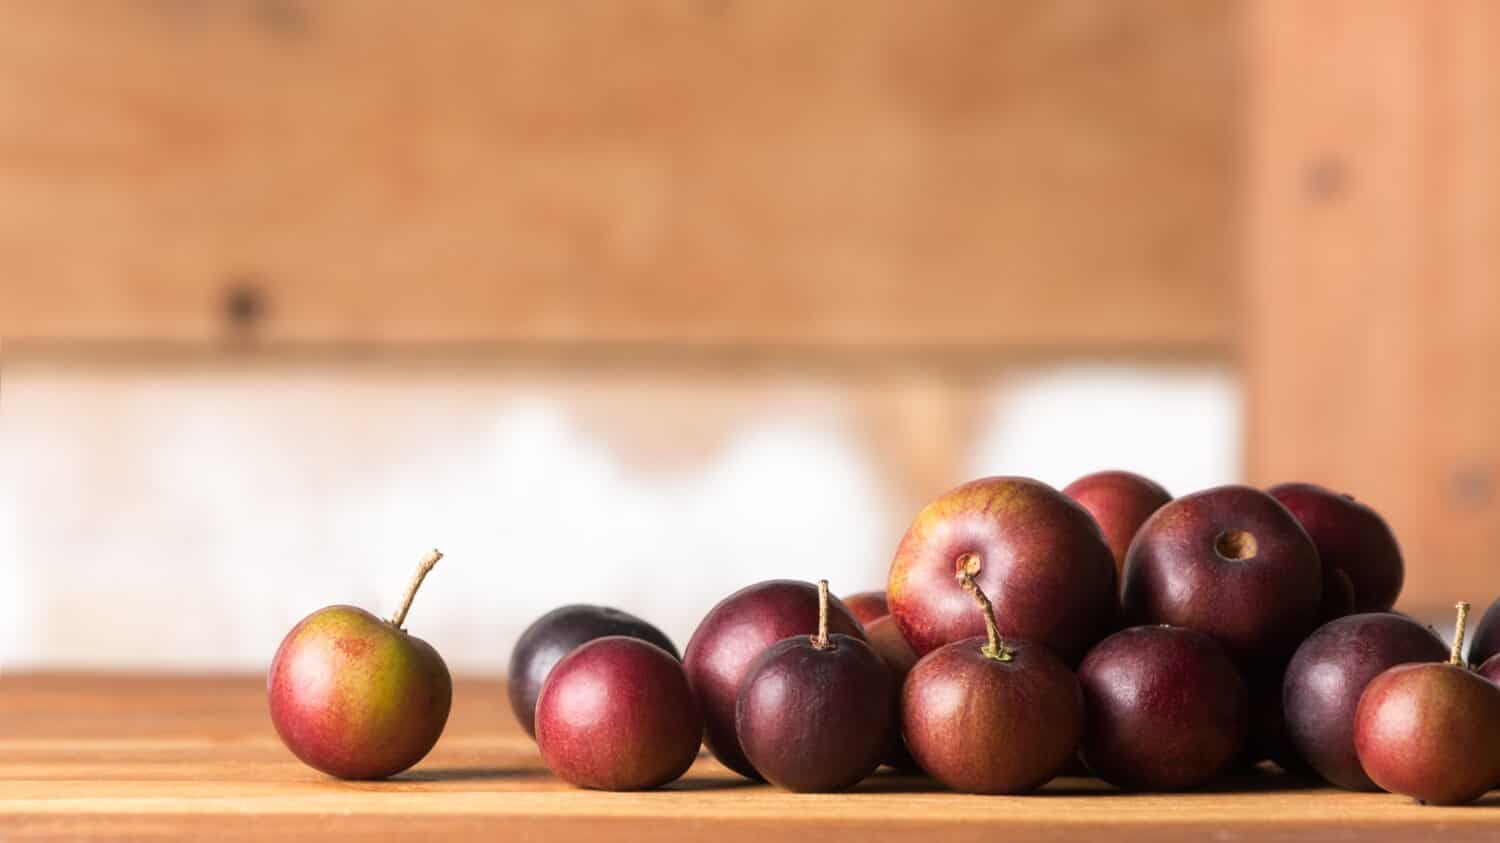 close-up of governor's plum fruits on wooden table top, flacourtia indica, also known as ramontchi, madagascar plum or indian plum, reddish black fleshy fruits, soft-focus wooden background